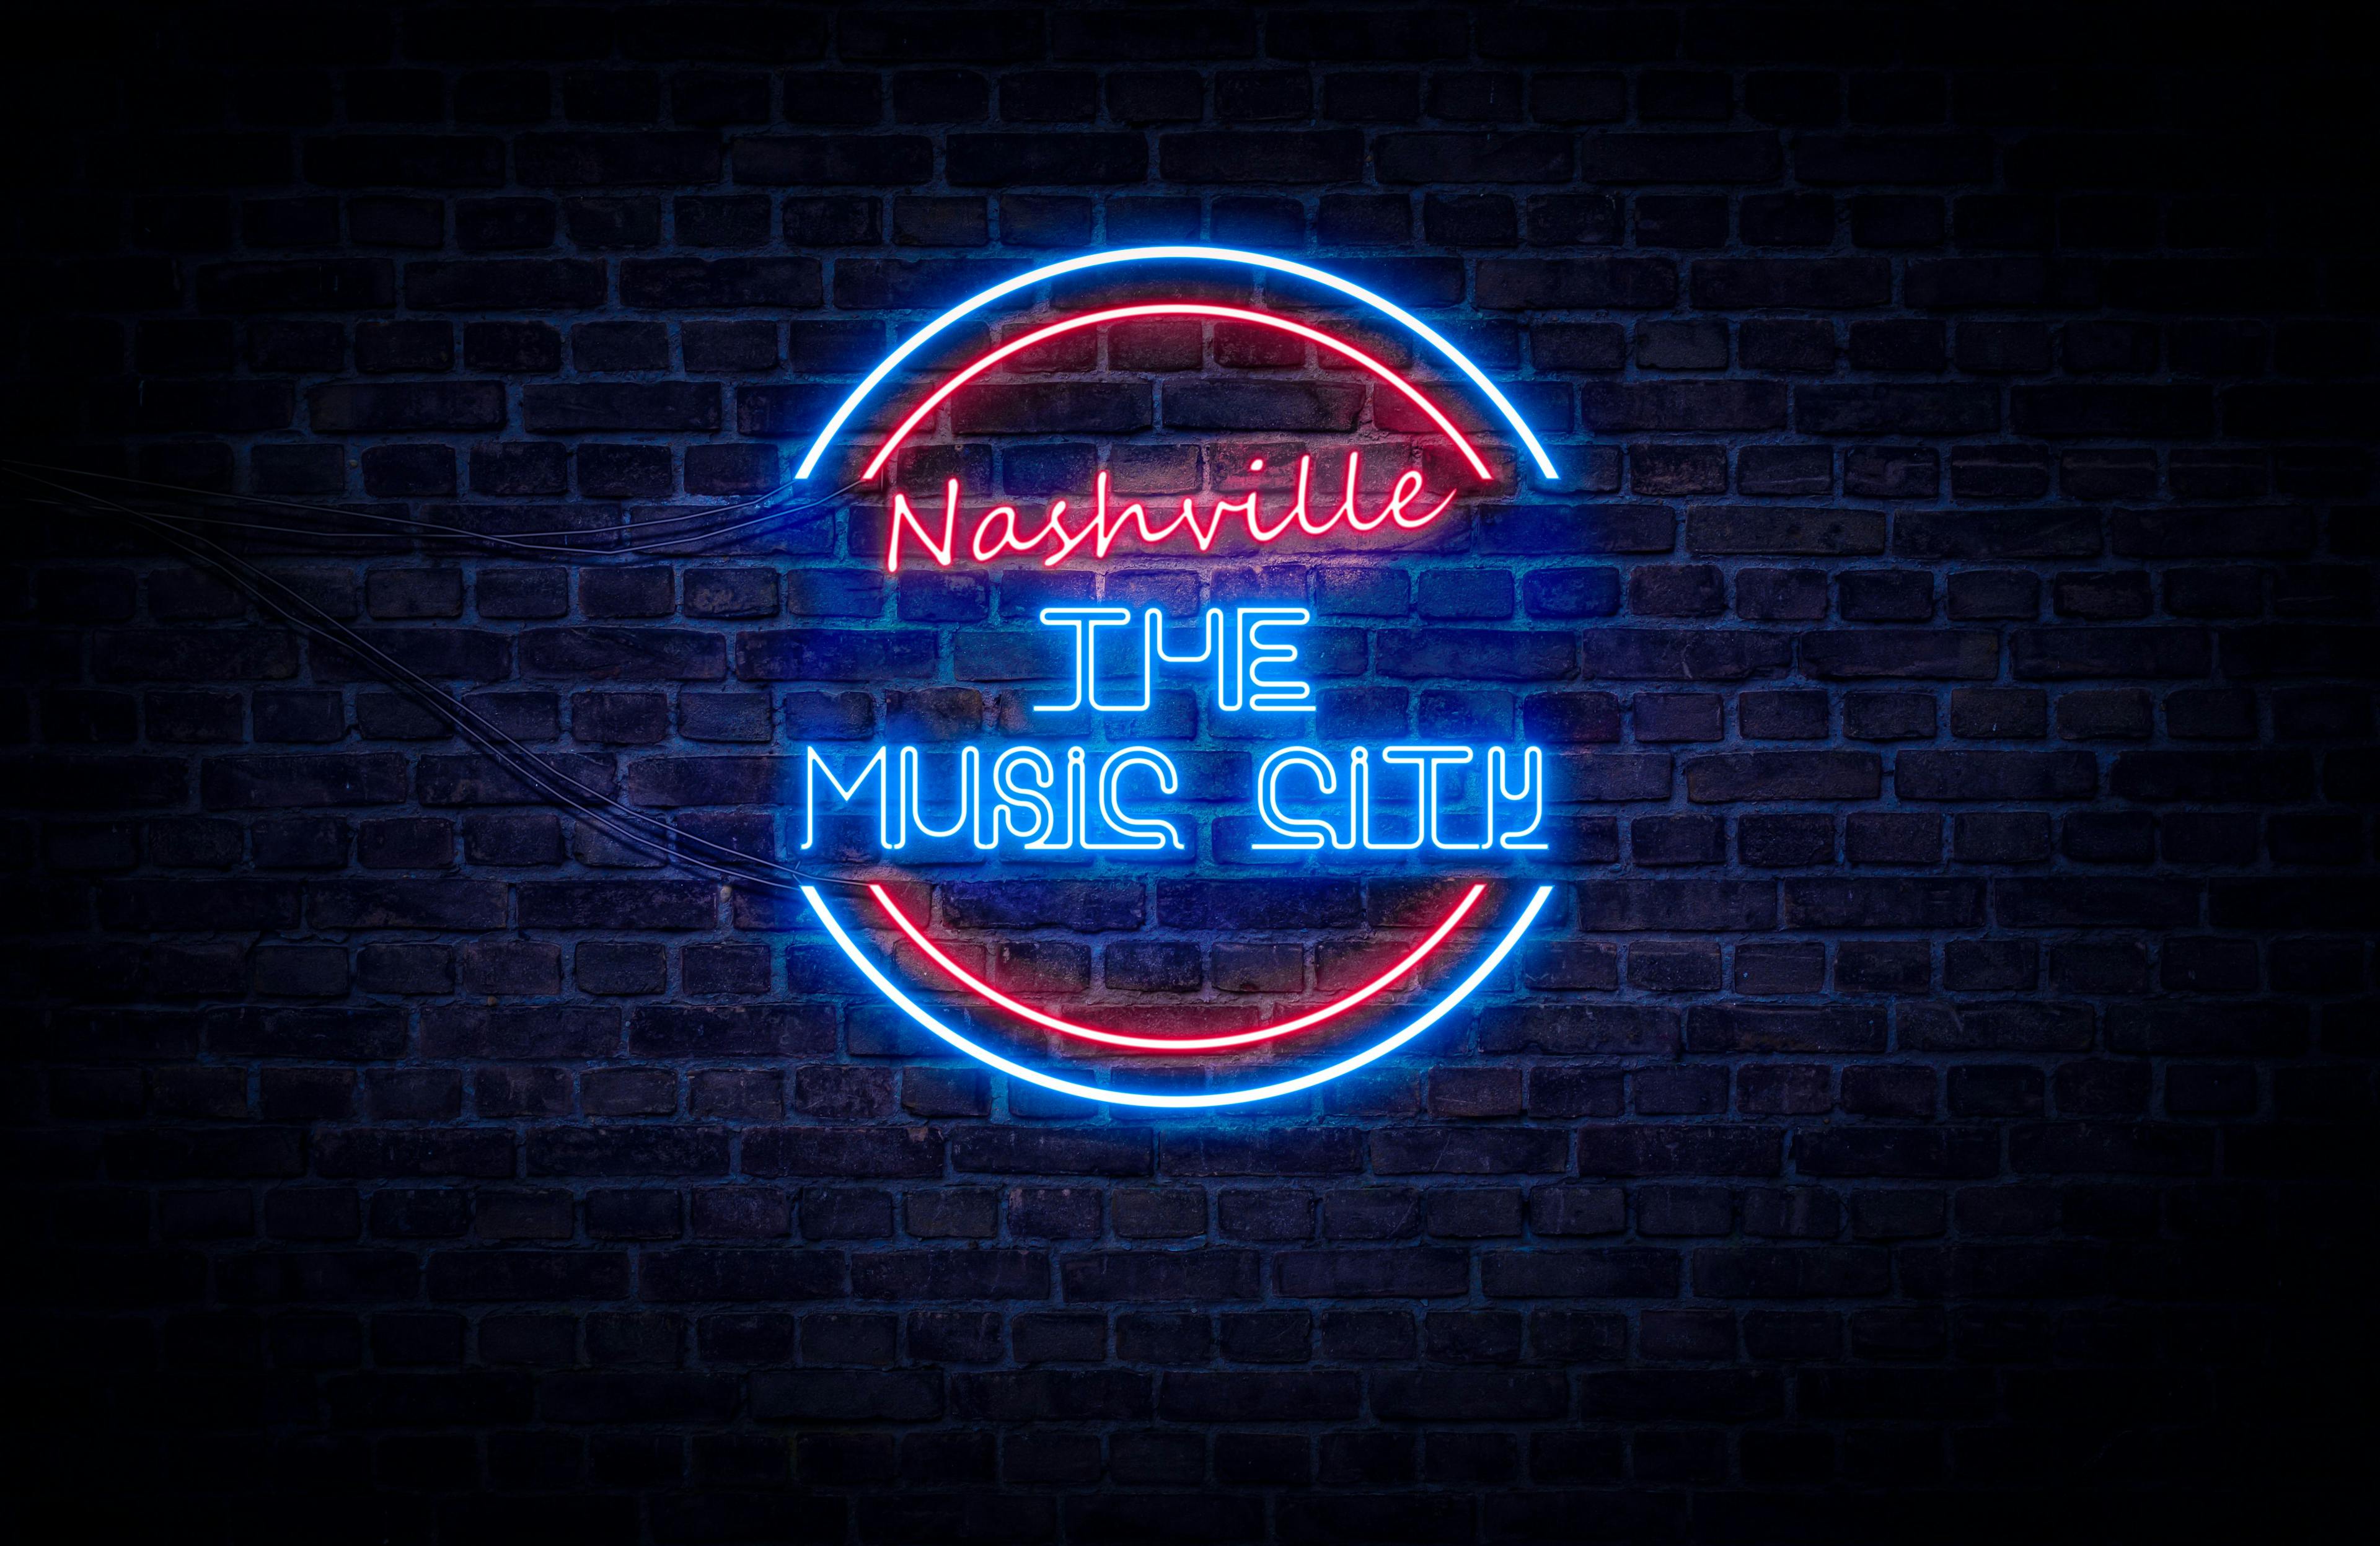 What to Expect at Music City SCALE 2023 